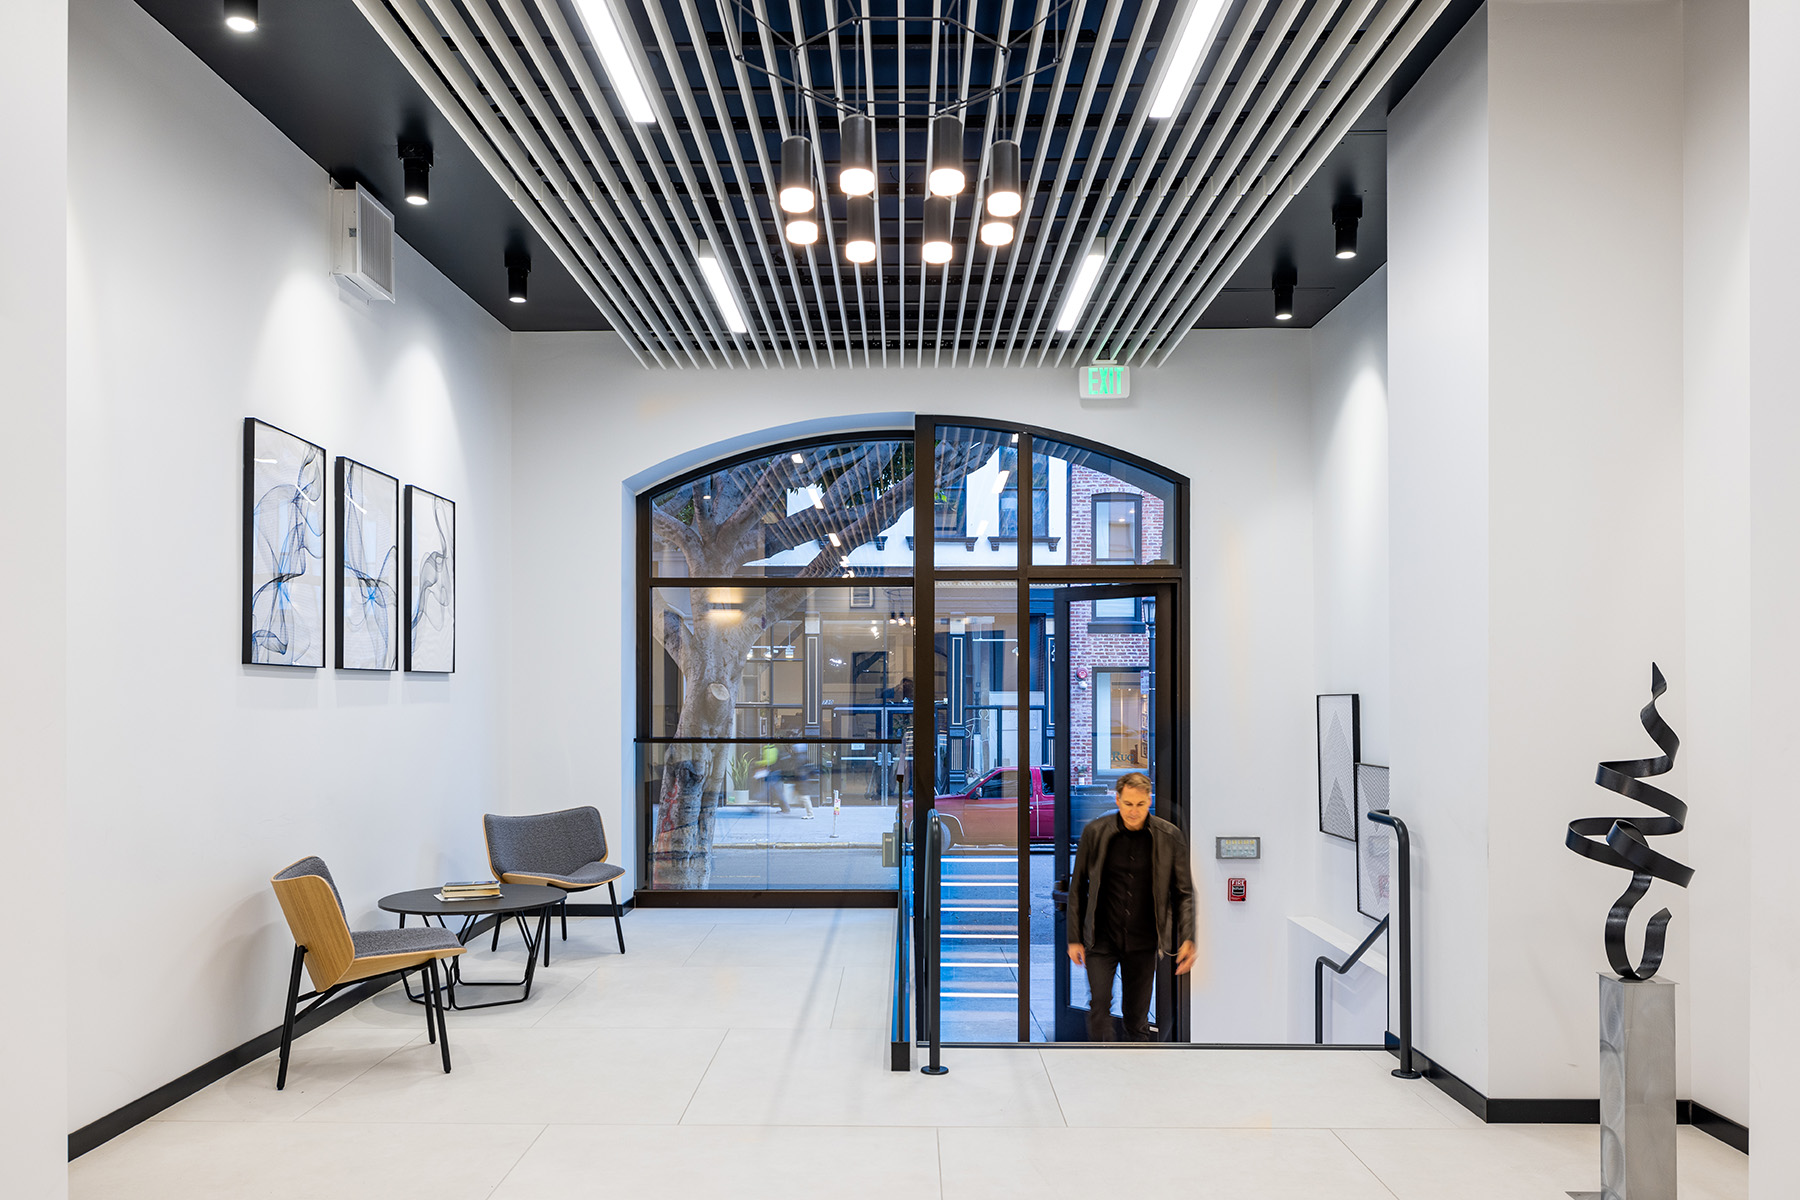 Costa Brown designers used interior lights to brighten the office lobby at 735 Montgomery Street, which has limited sunlight from the windows facing the street